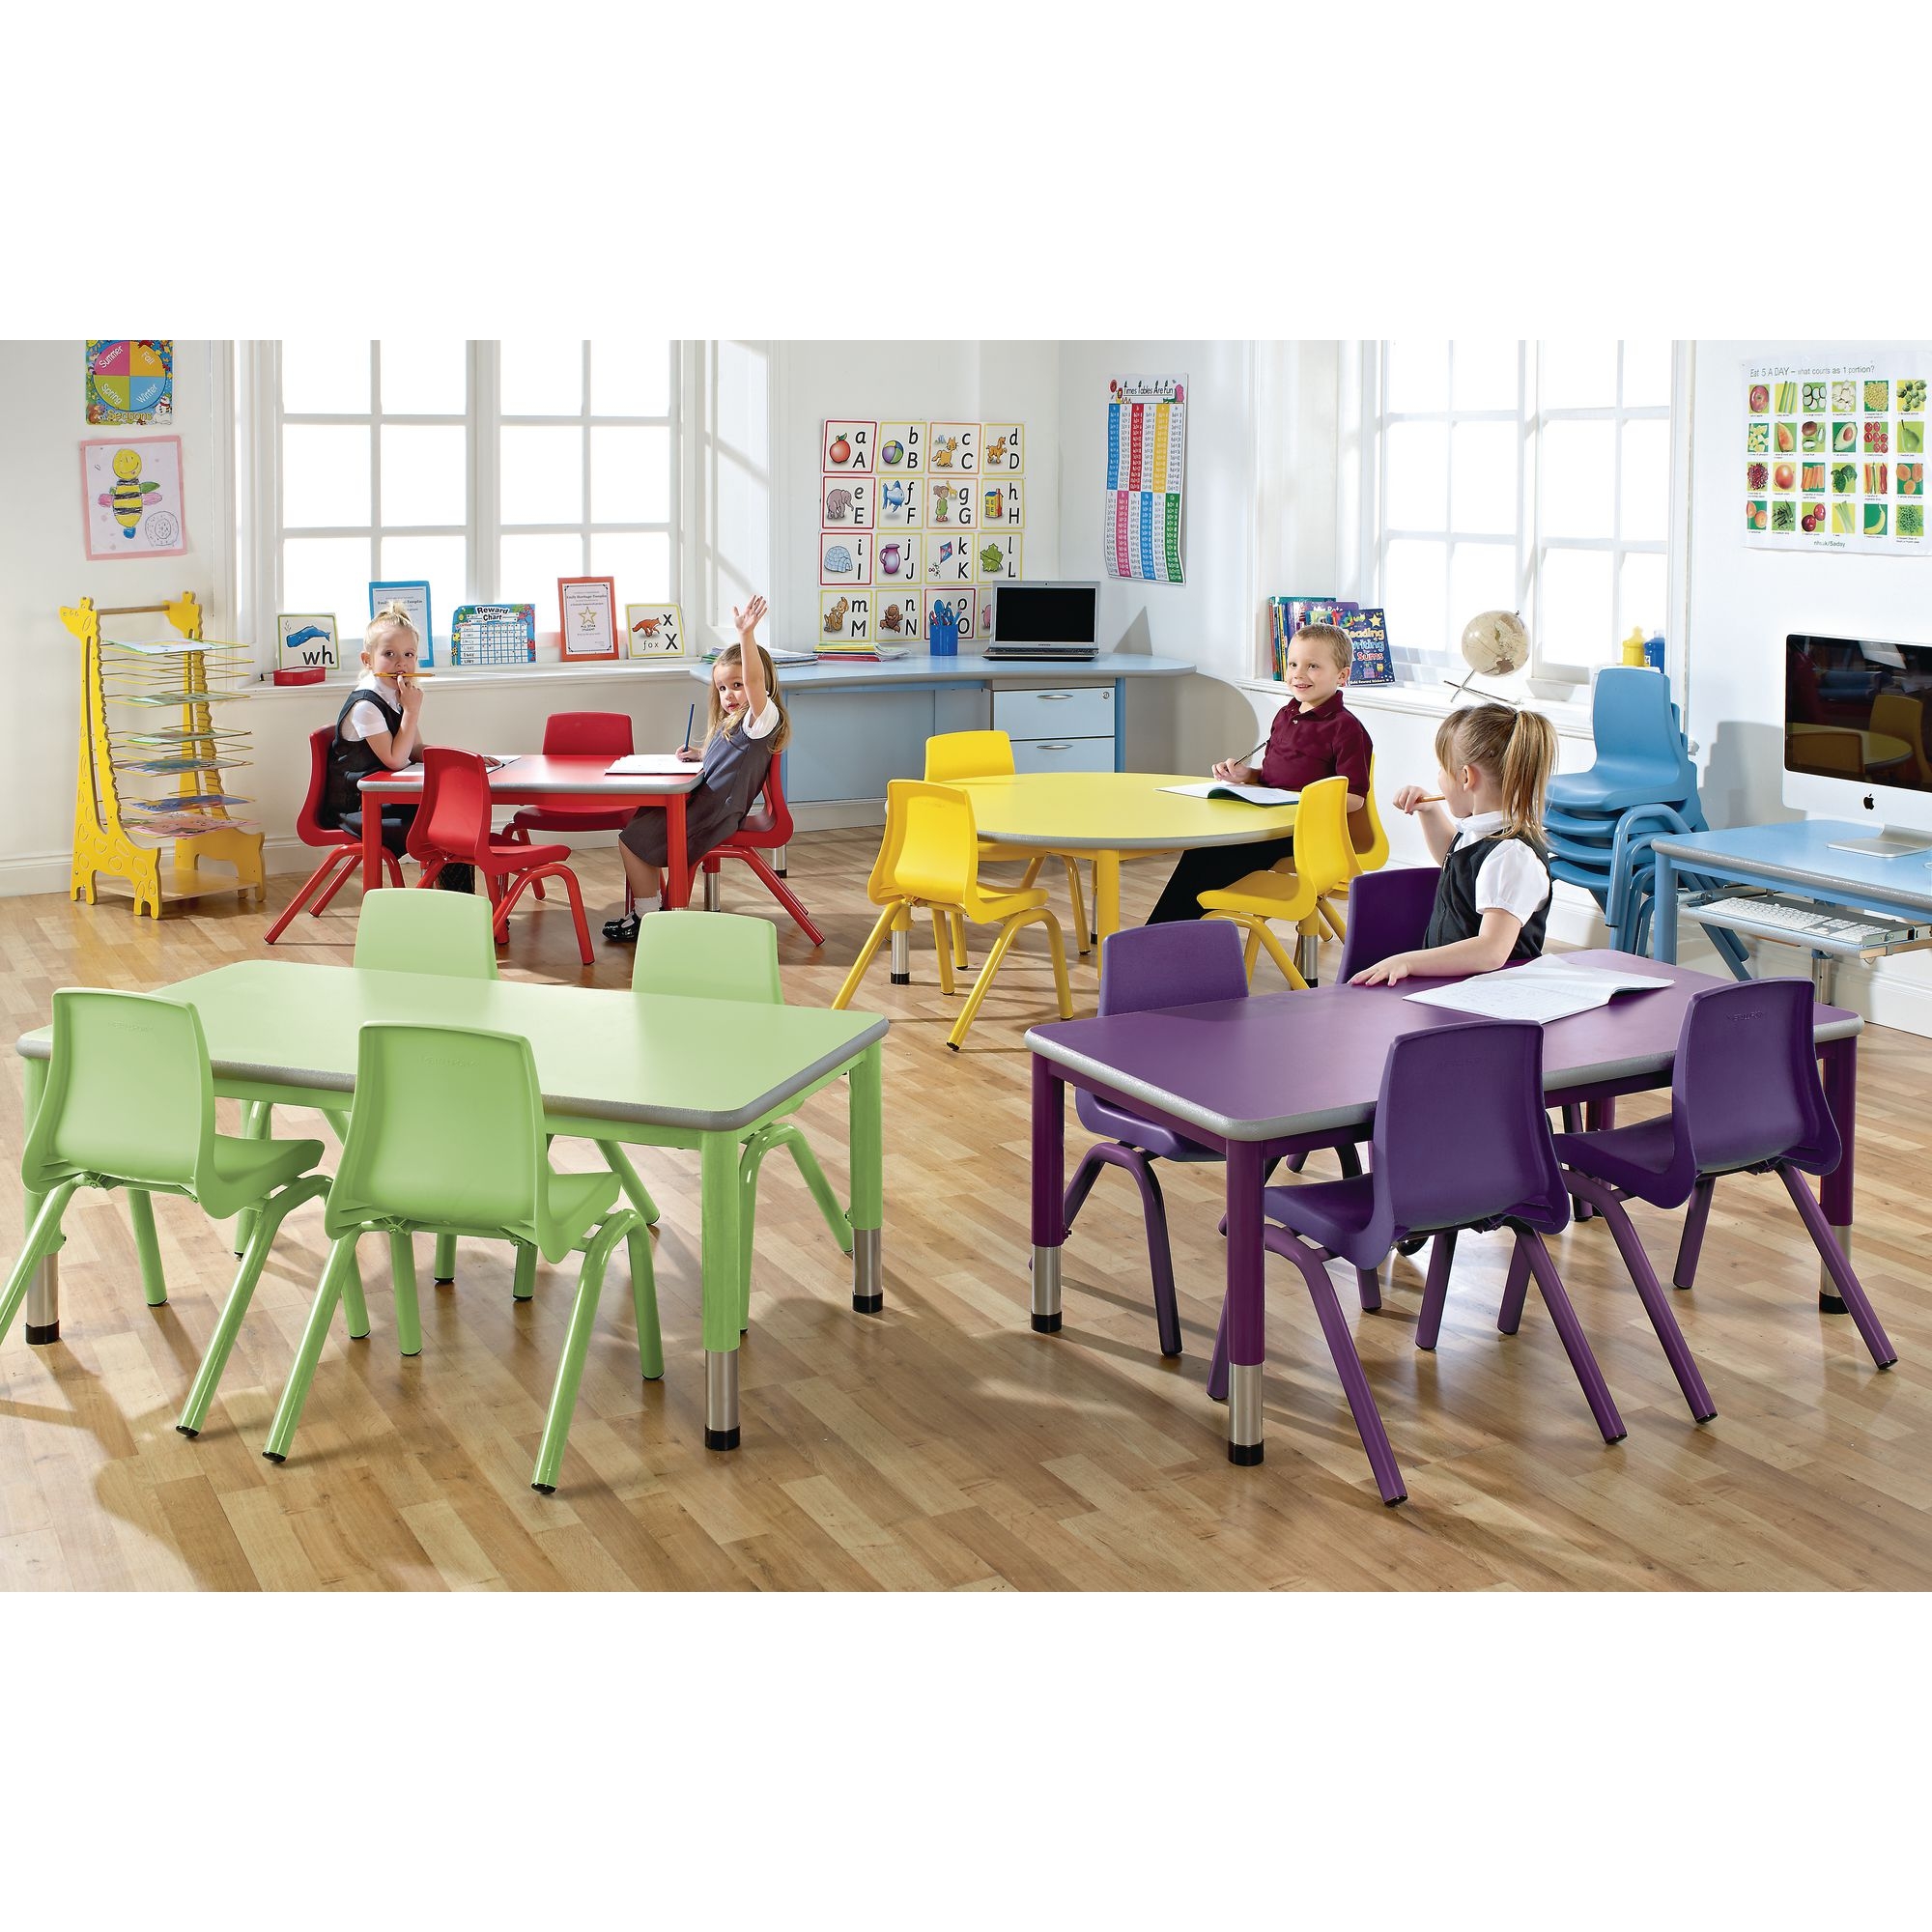 Harlequin Rectangular Height Adjustable Steel Classroom Pack: Table and 4 Chairs - 900 x 600 x 530mm - Soft Blue